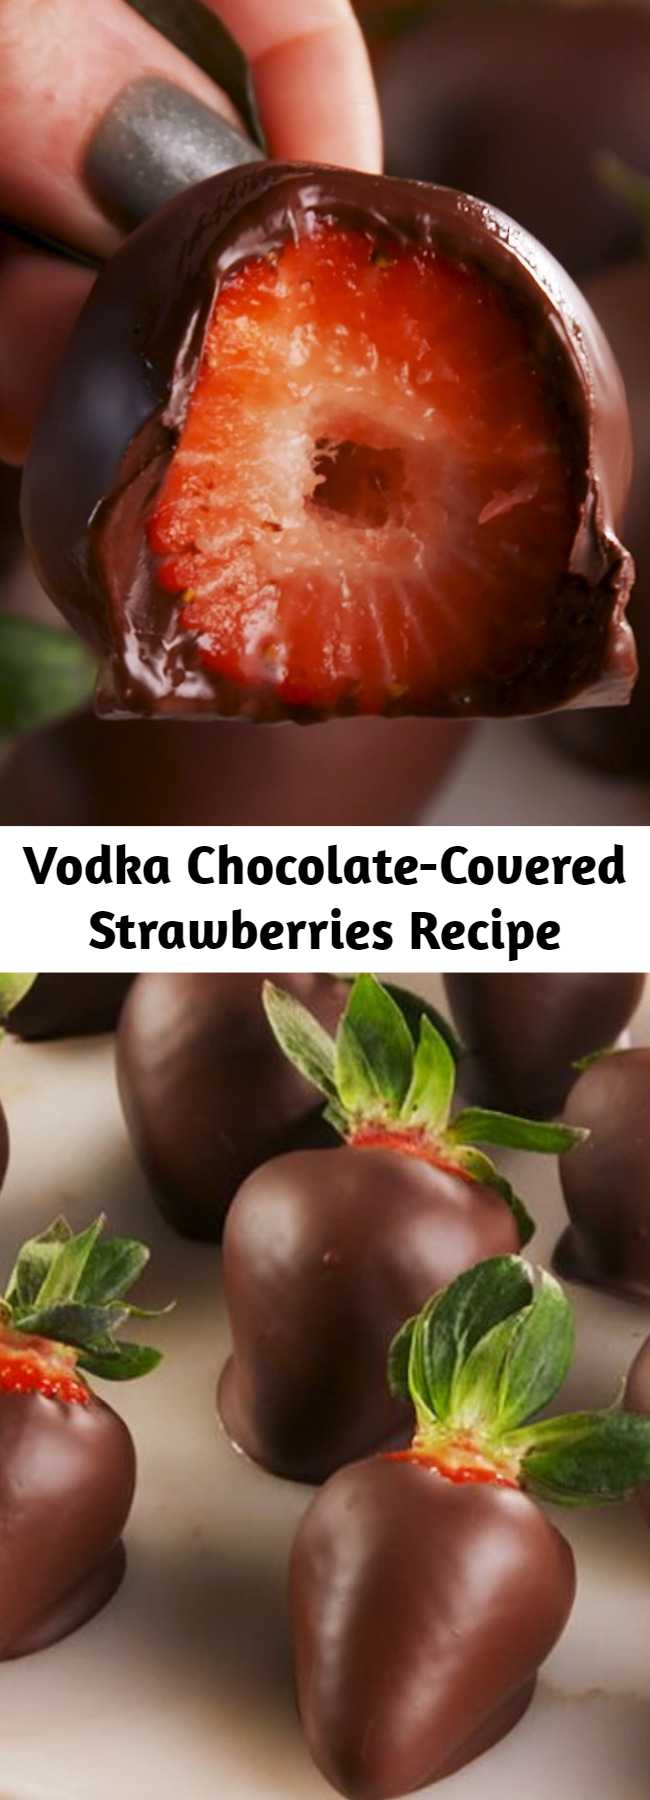 Vodka Chocolate-Covered Strawberries Recipe - Soaking your strawberries in vodka is the best gift you can give yourself. #easy #recipe #vodka #chocolate #strawberries #alcohol #adults #valentines #valentinesday #galentines #party #ideas #cute